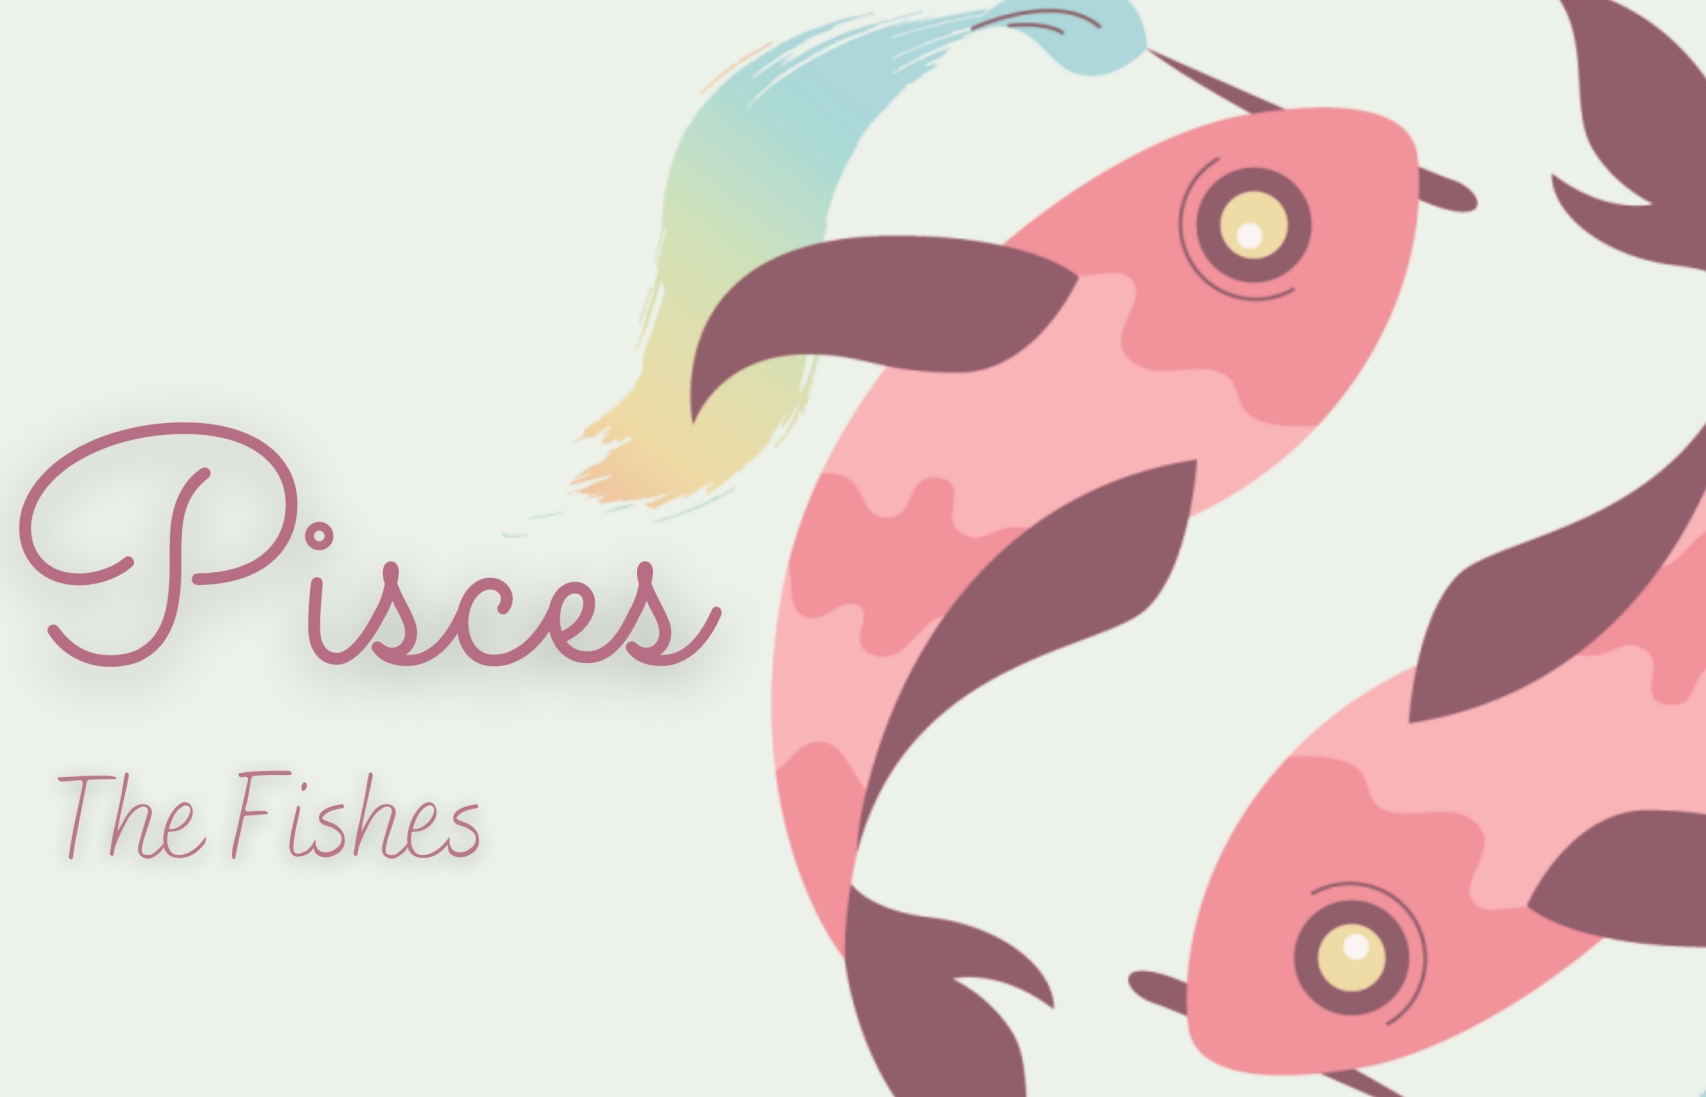 PISCES Horoscope: Characteristics, Astrological Predictions & Compatibility